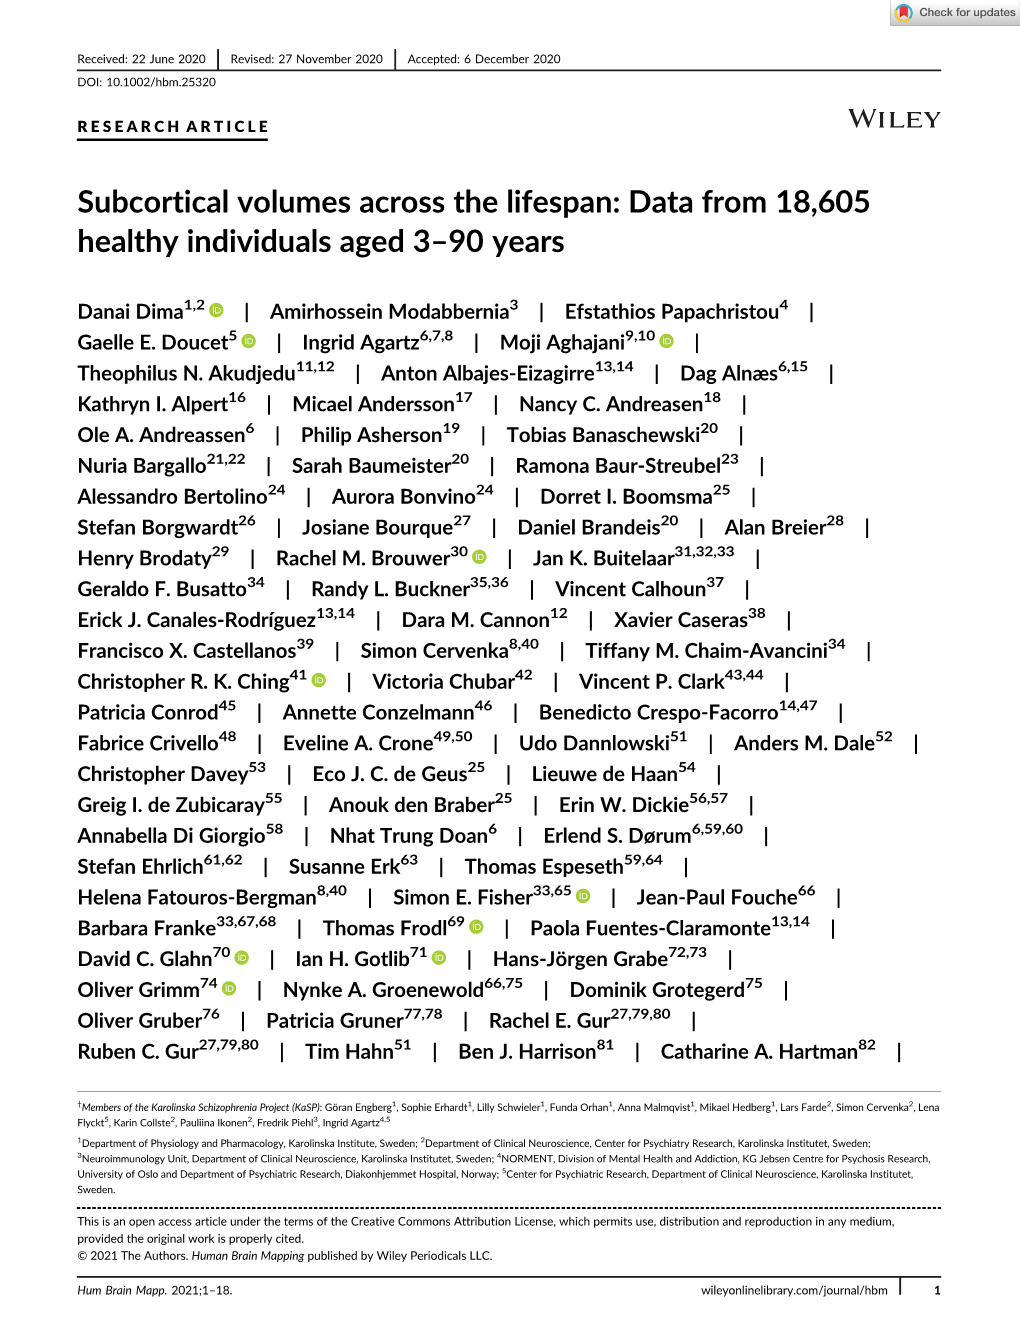 Subcortical Volumes Across the Lifespan: Data from 18,605 Healthy Individuals Aged 3–90 Years